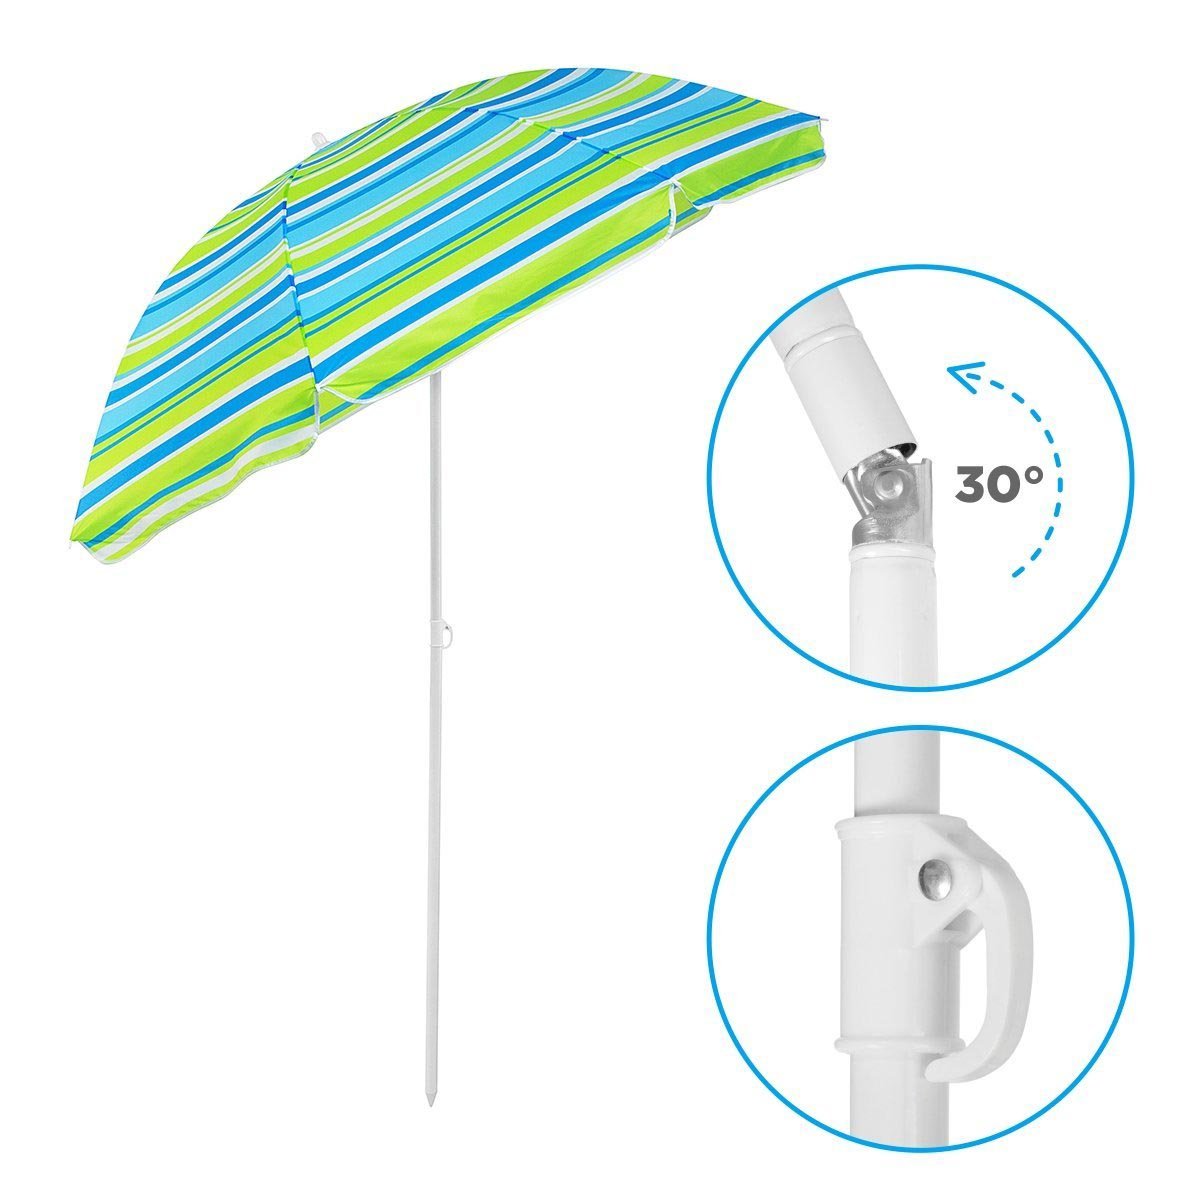 4, 5 ft Sea-Green Tilting Beach Umbrella with Carry Bag featuring a 30 inclination degree